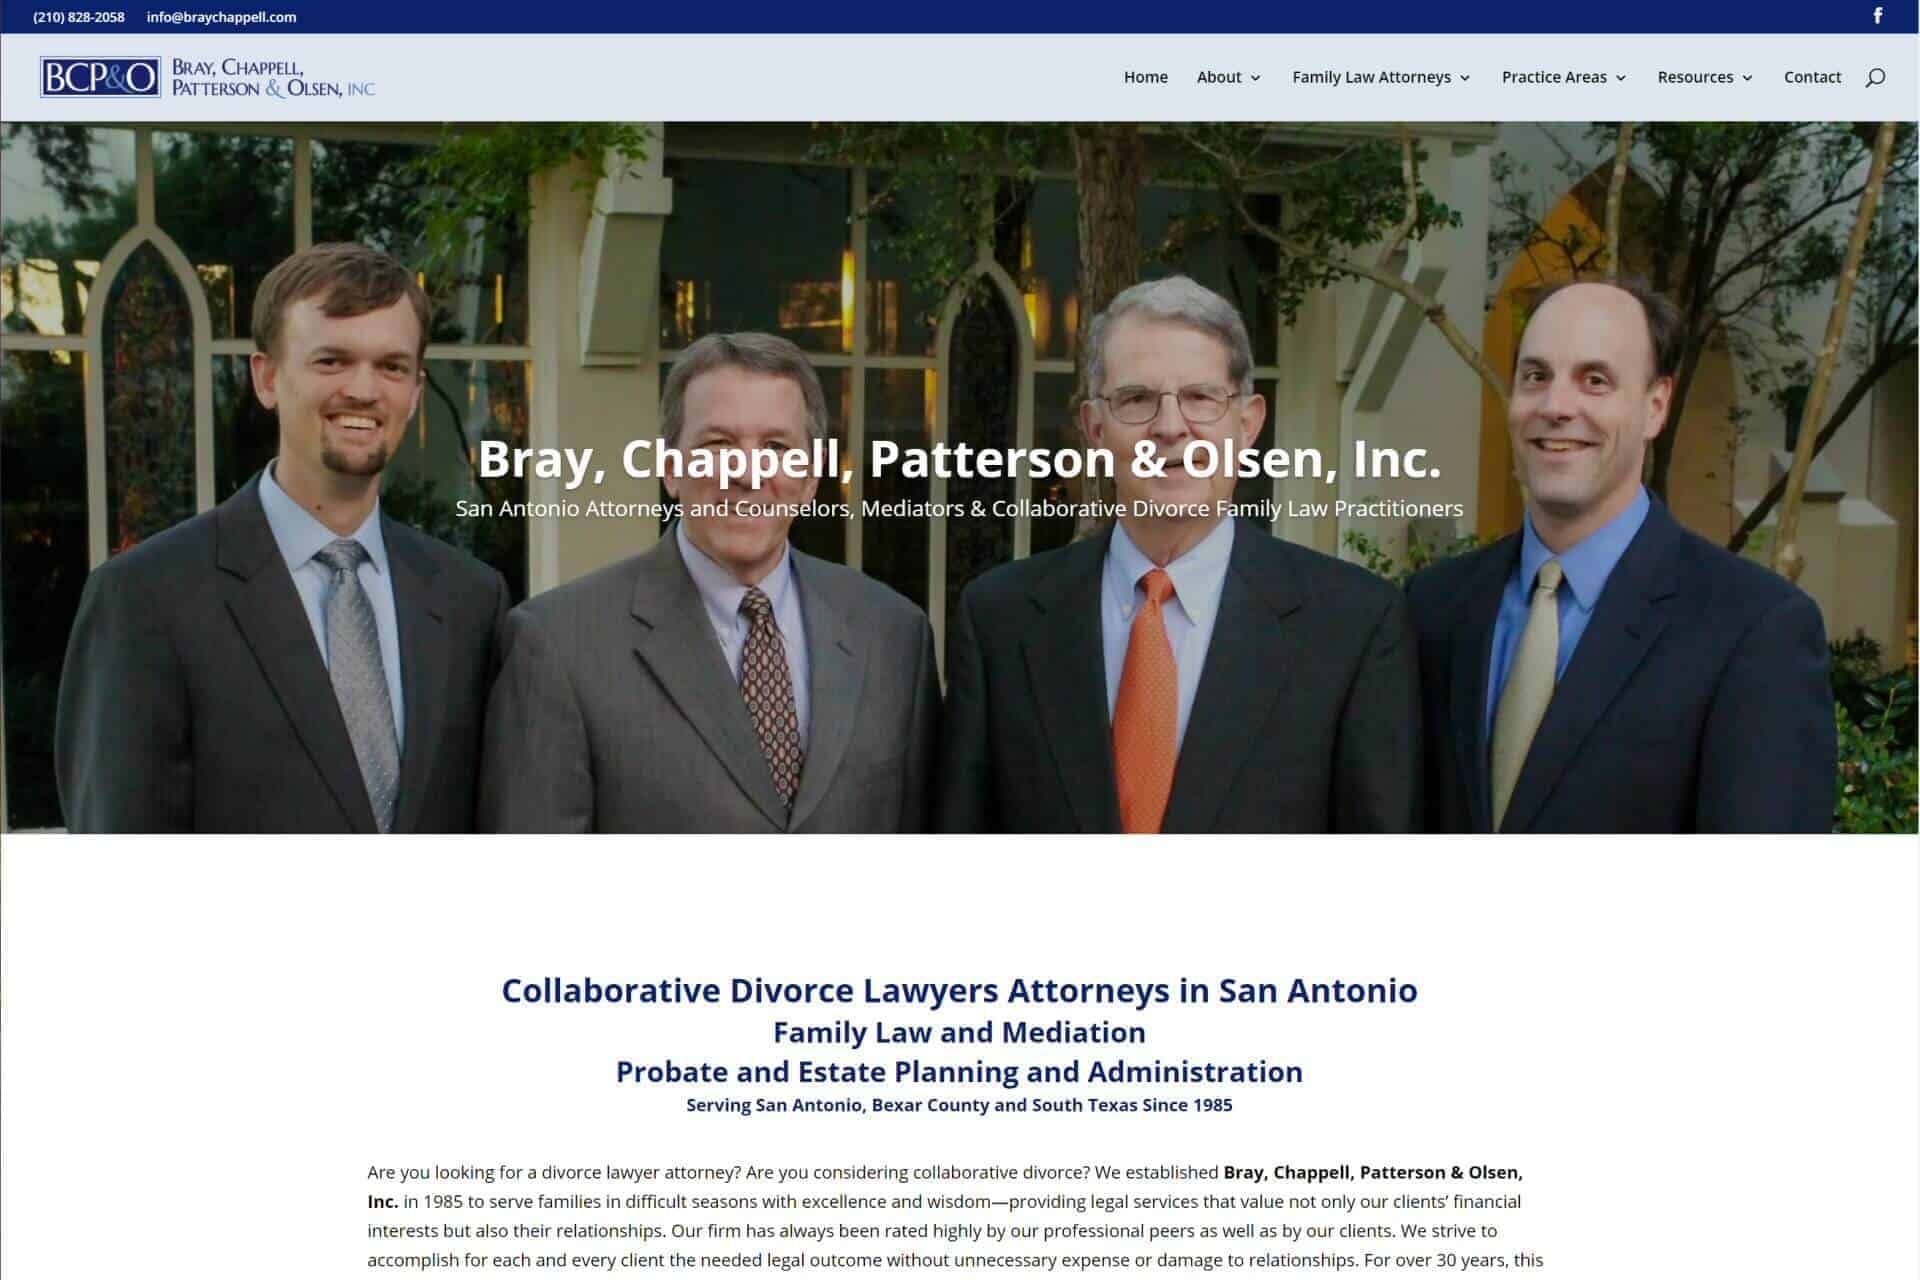 Bray, Chappell, Patterson & Olsen, Inc. by Impeccable Network Services